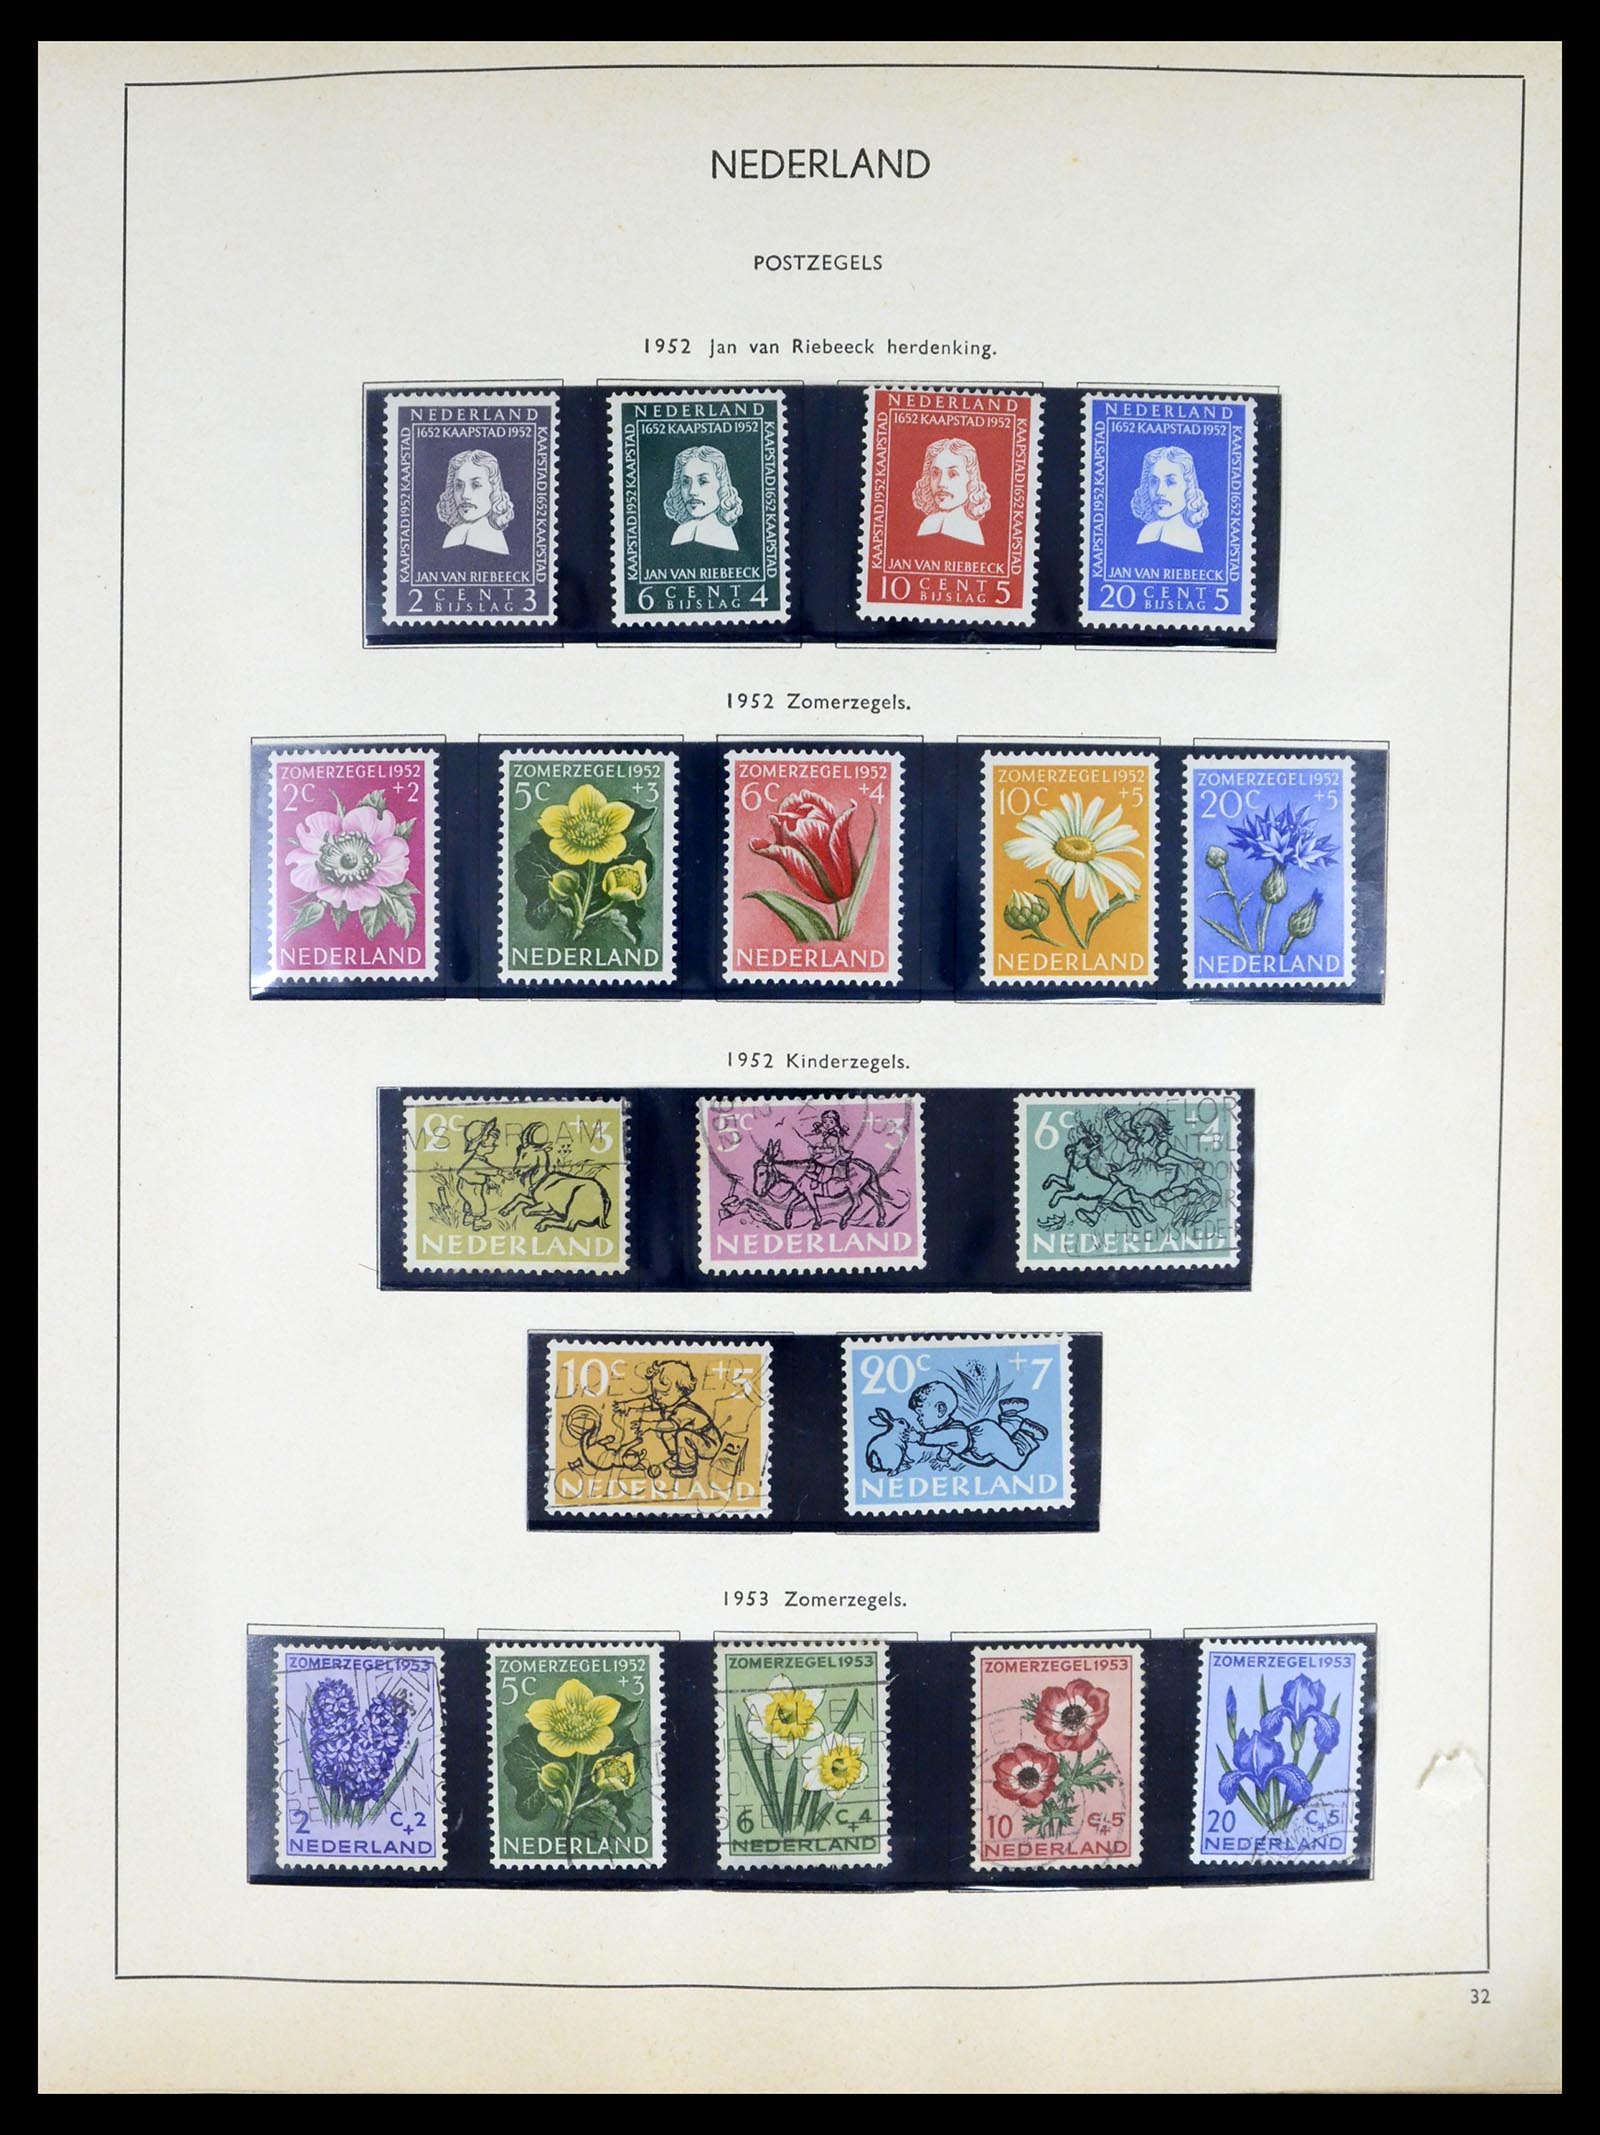 37618 027 - Stamp collection 37618 Netherlands and territories 1852-1972.